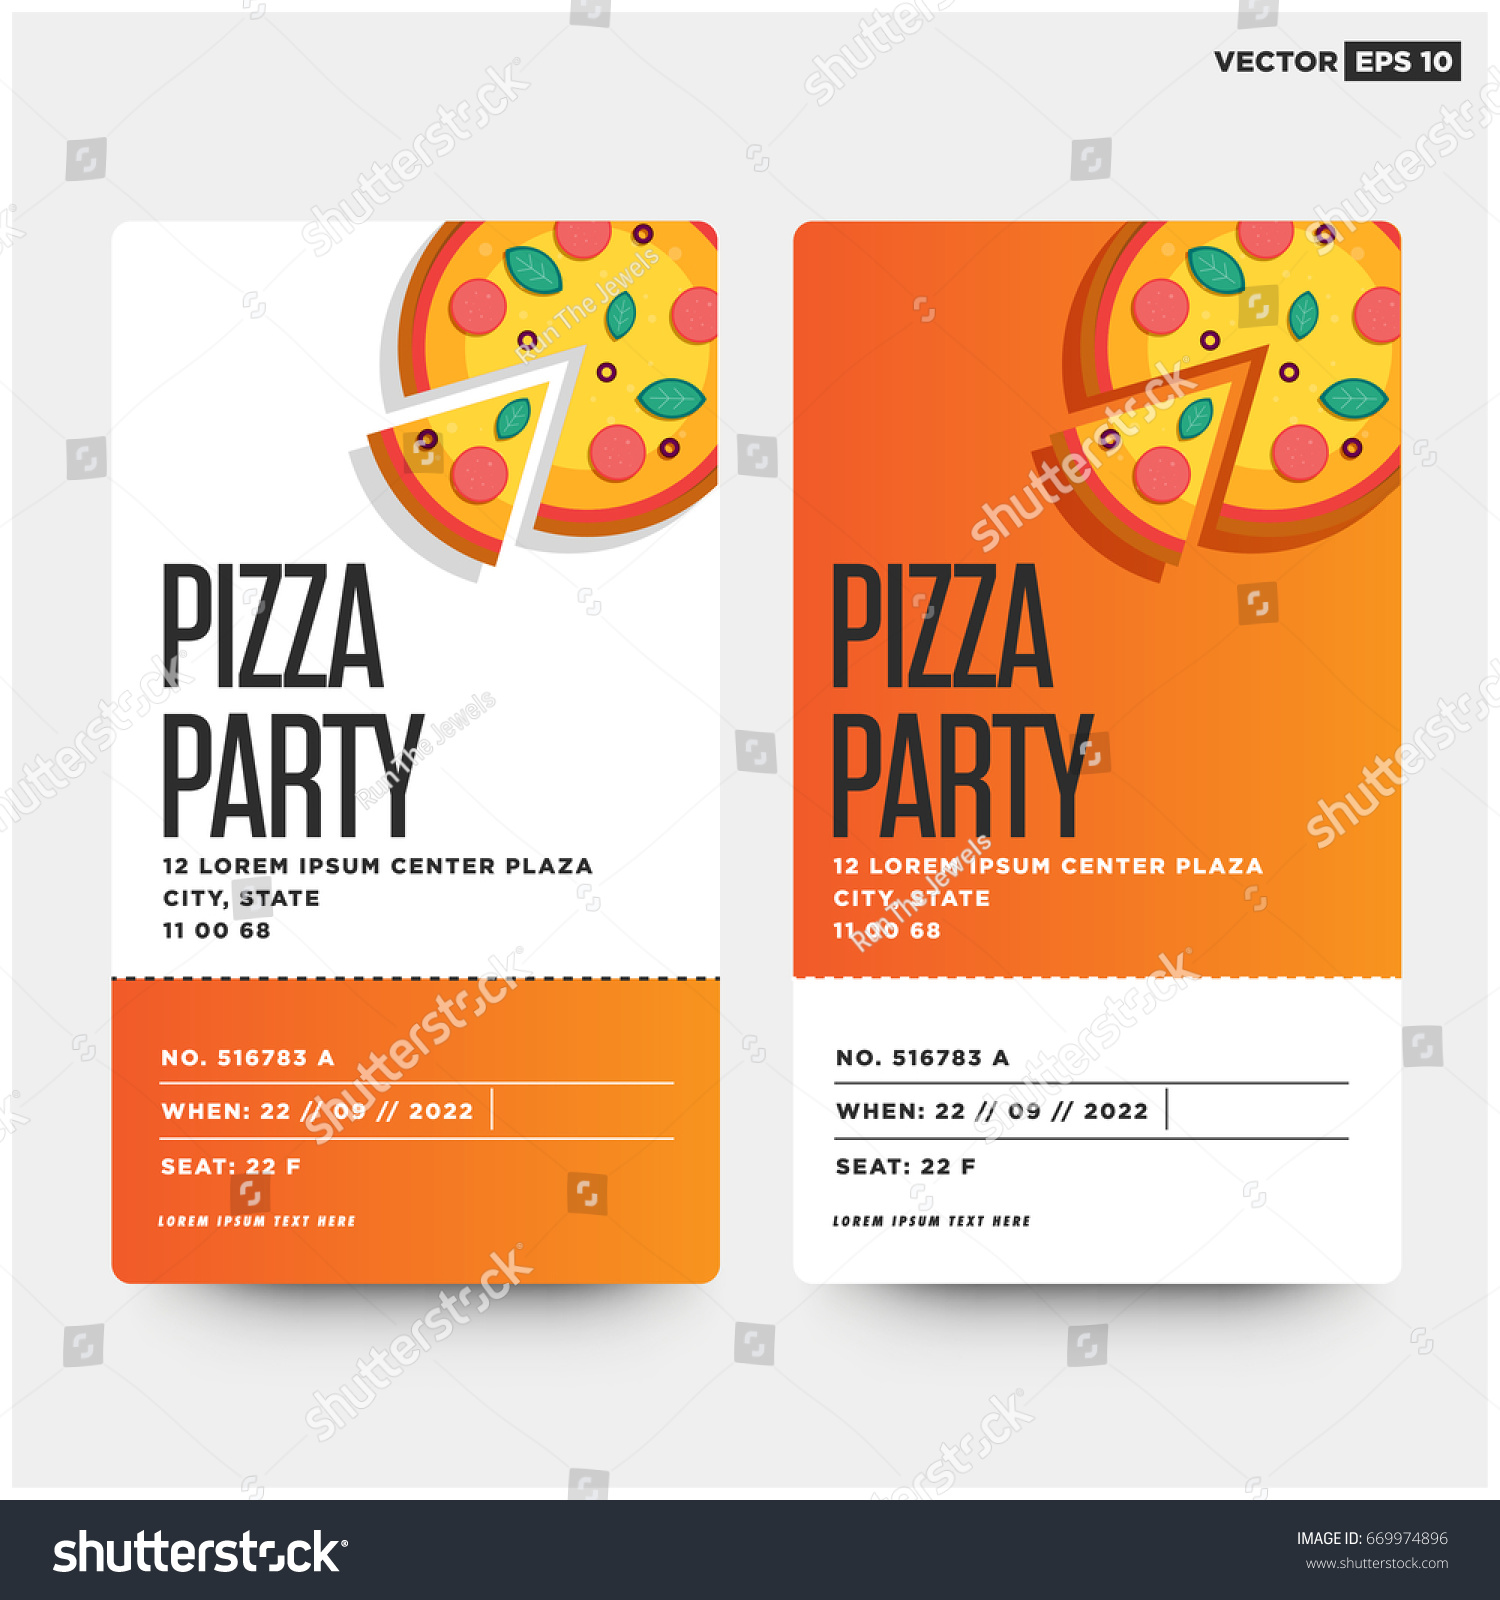 Pizza Party Invitations Template from image.shutterstock.com